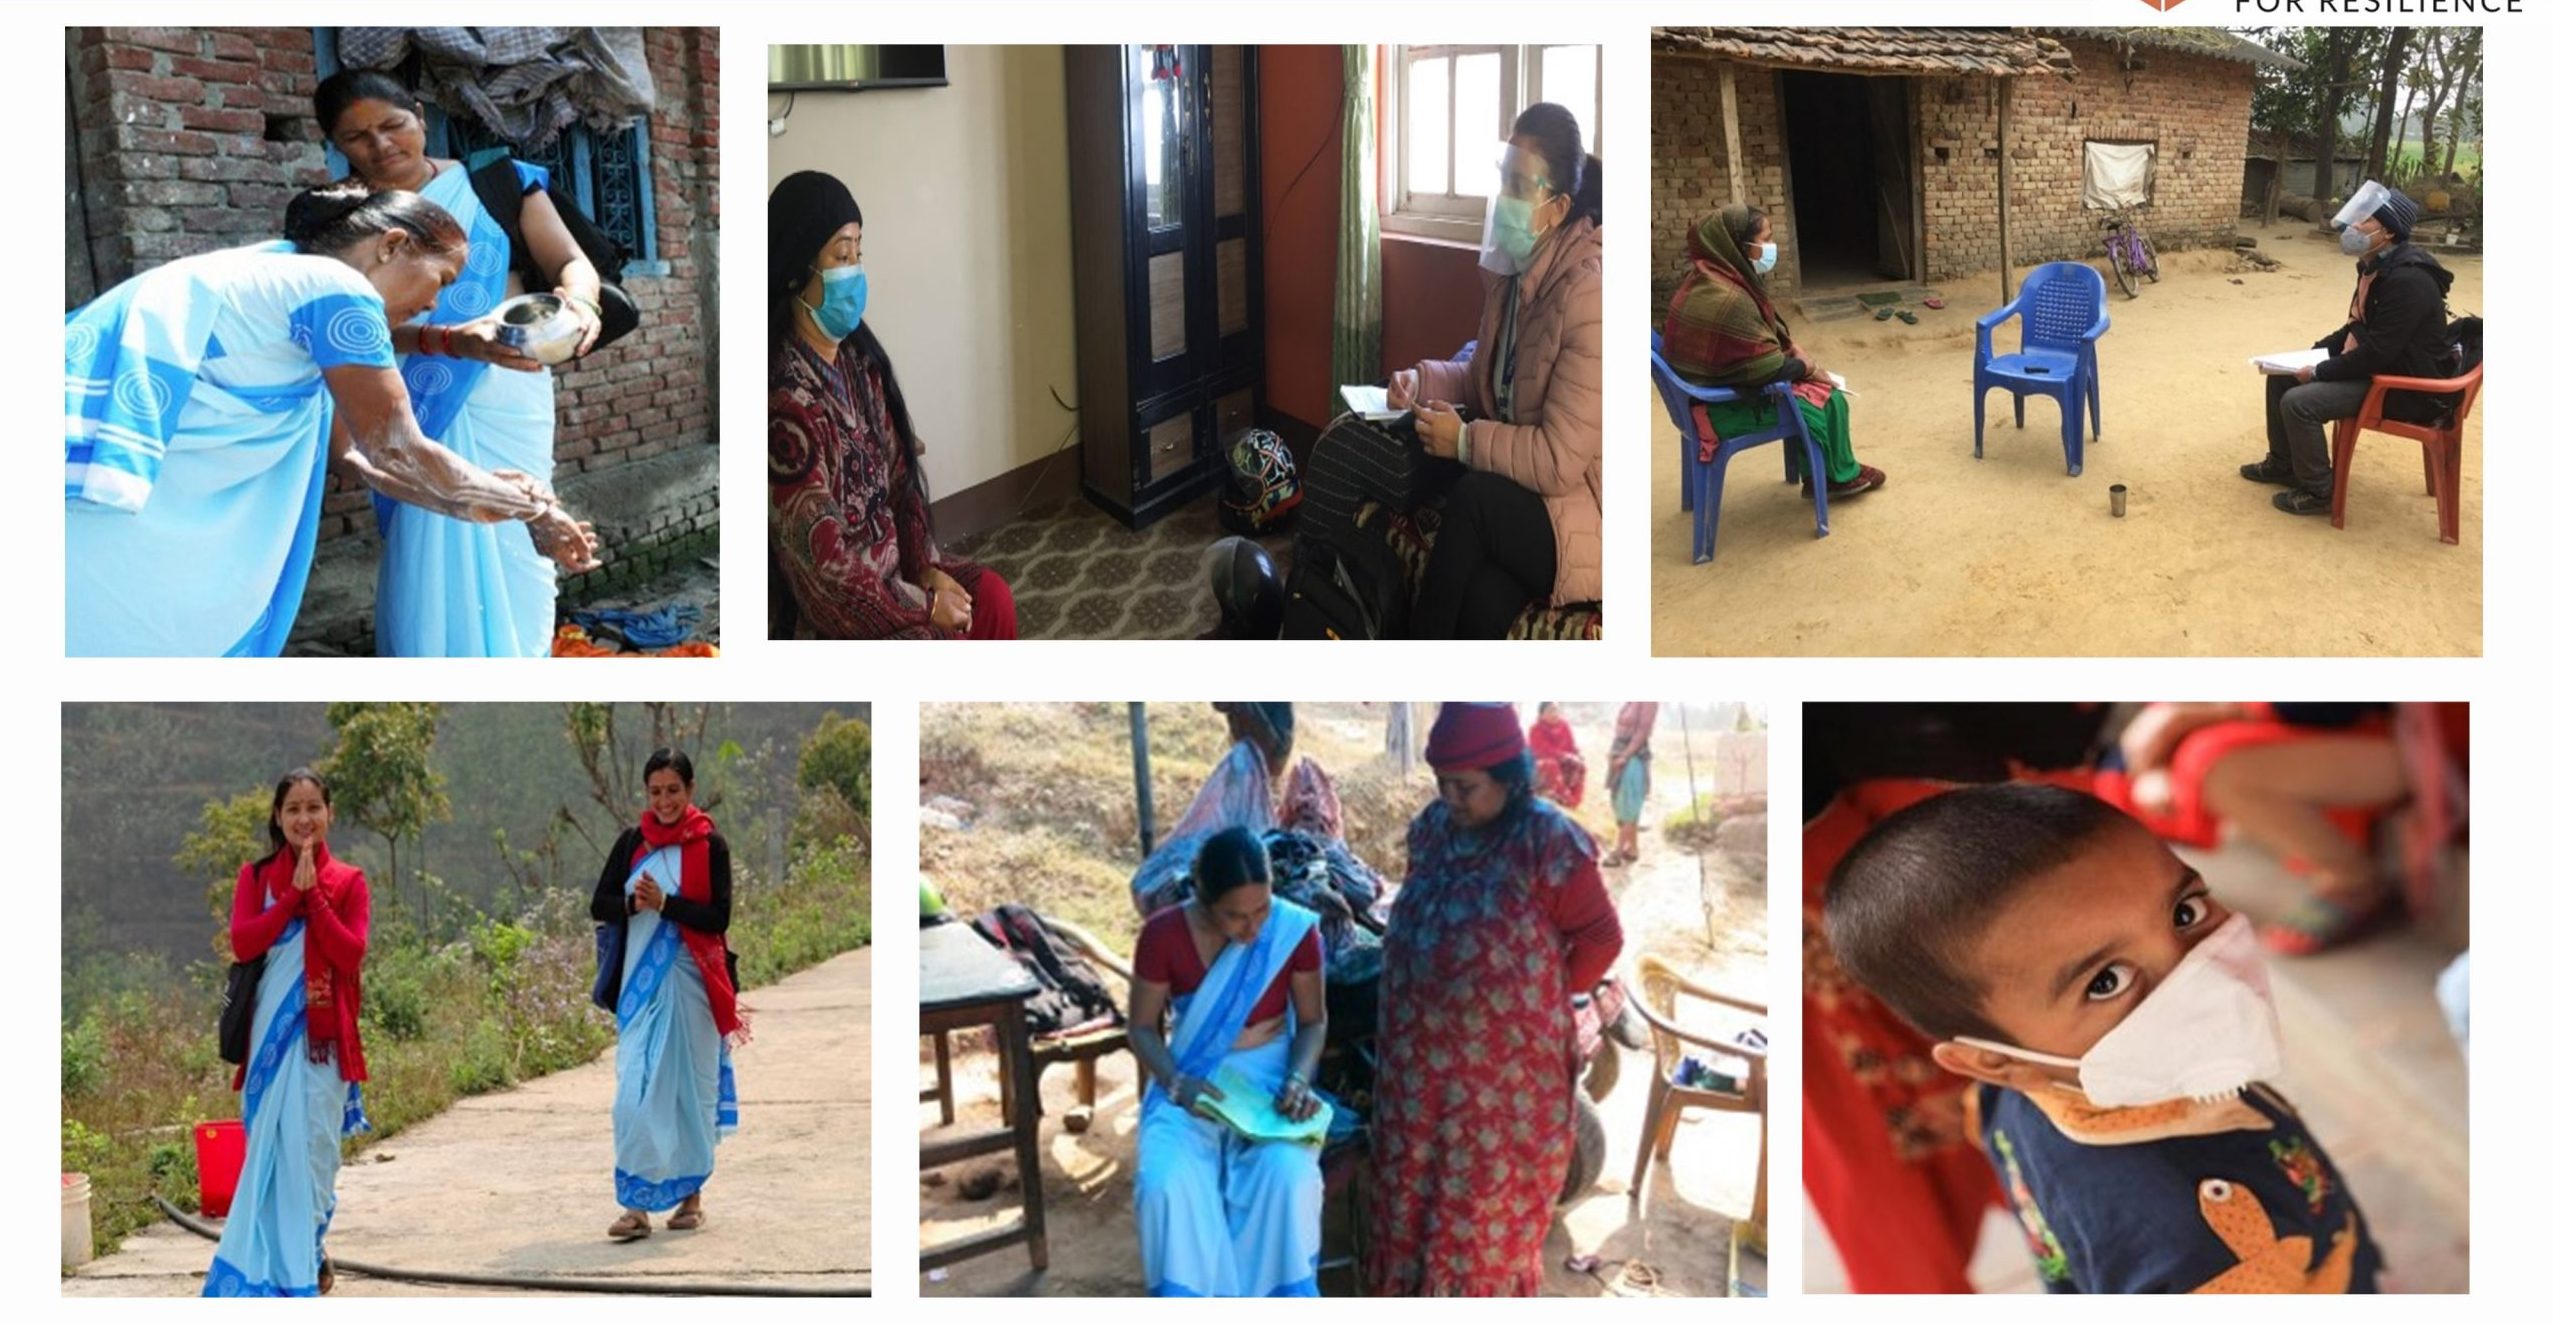 a montage of 6 images showing community health workers active in Nepal